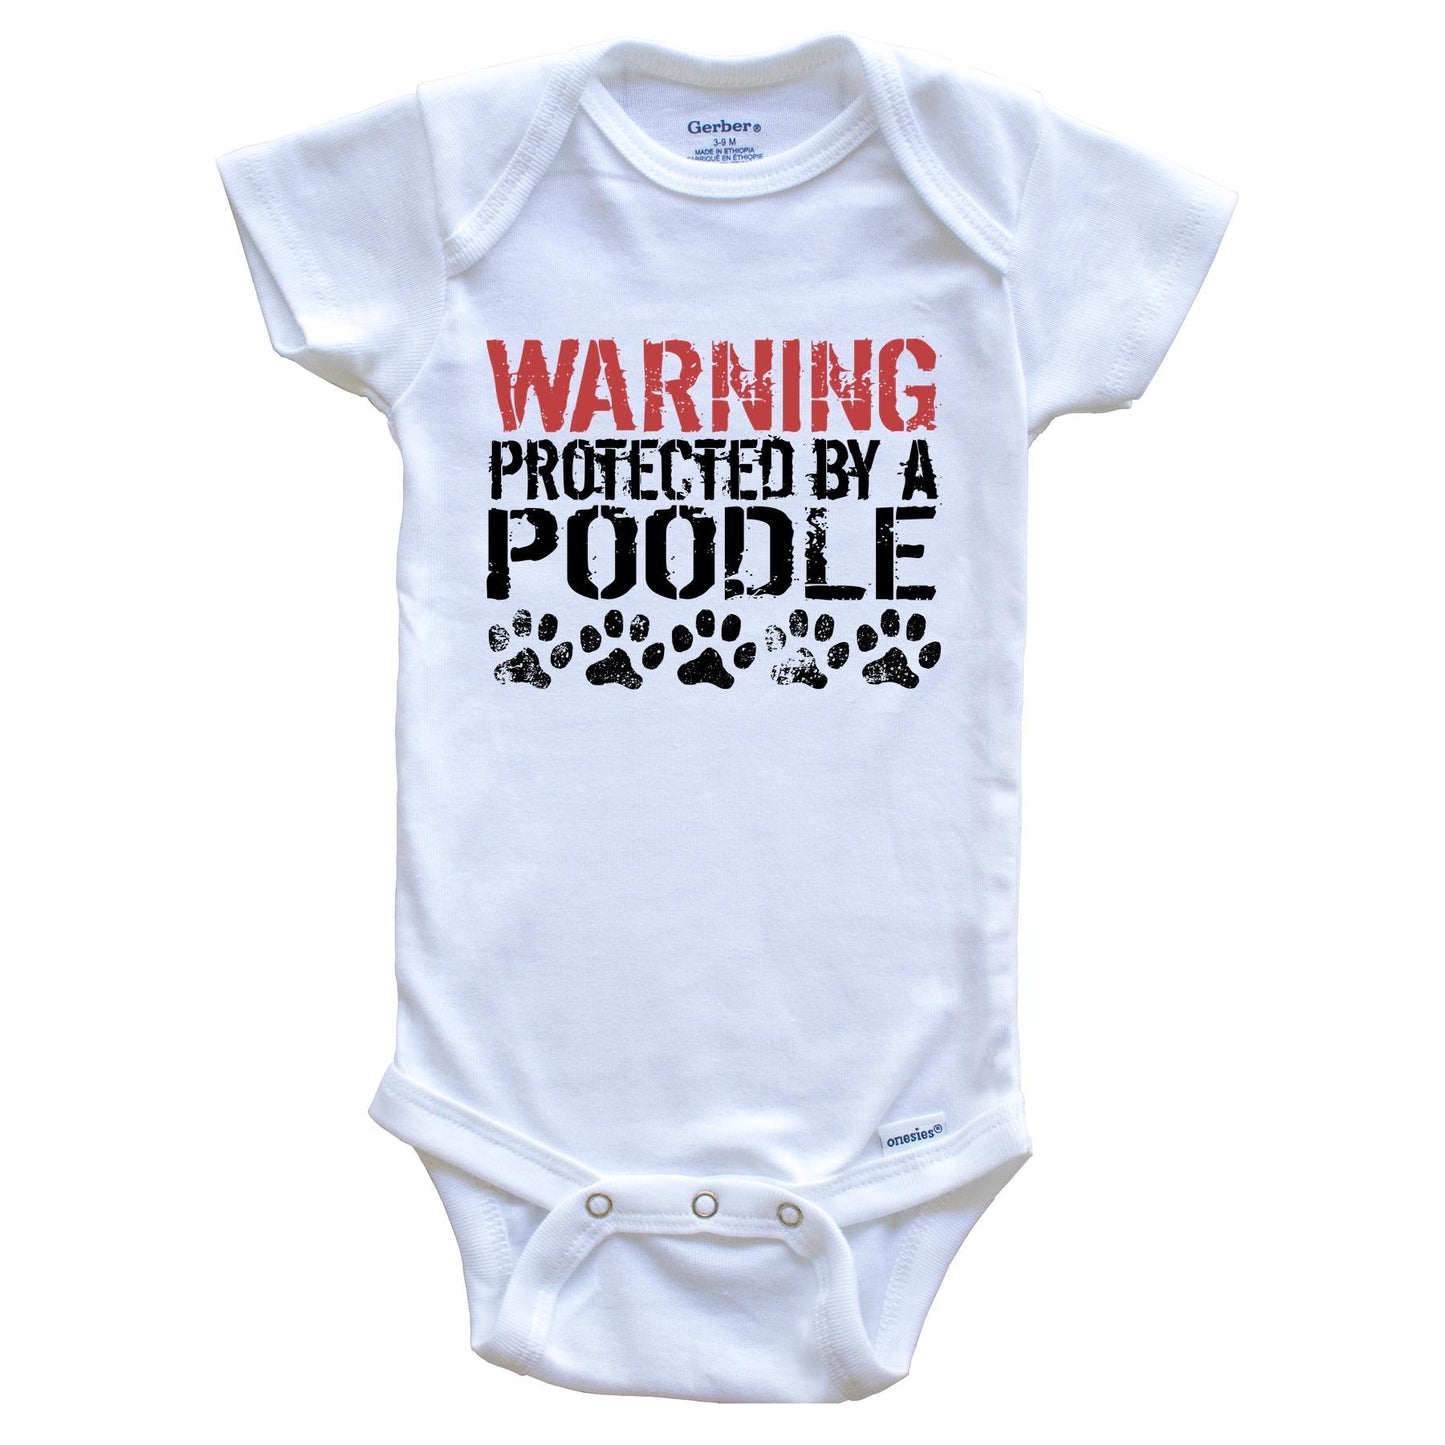 Warning Protected By A Poodle Baby Onesie